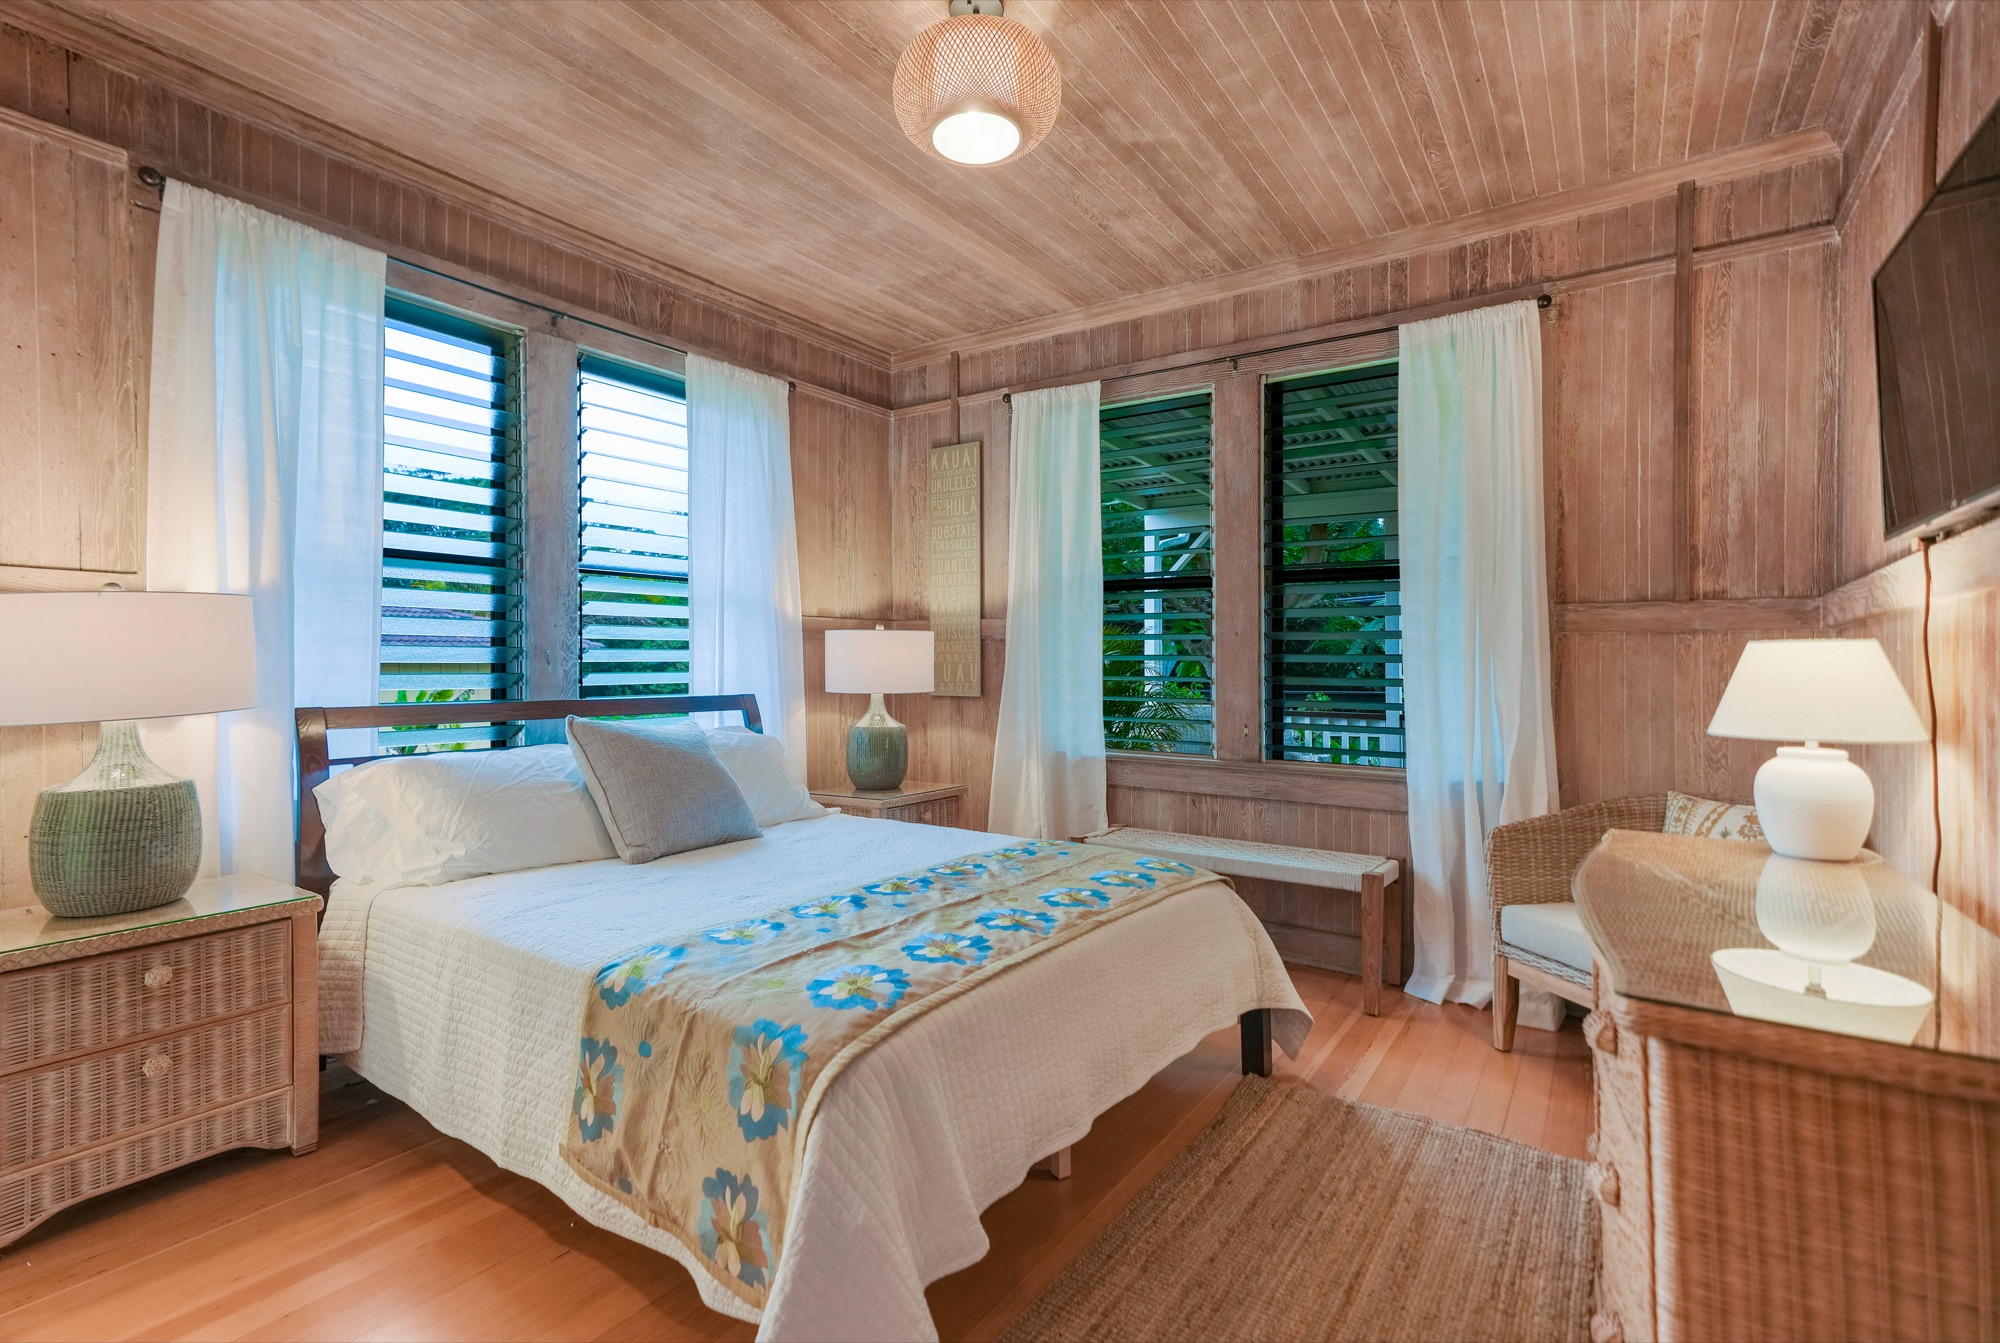 The sound of waterfalls will lull you to sleep in the main house's master bedroom #2, with queen-size bed.